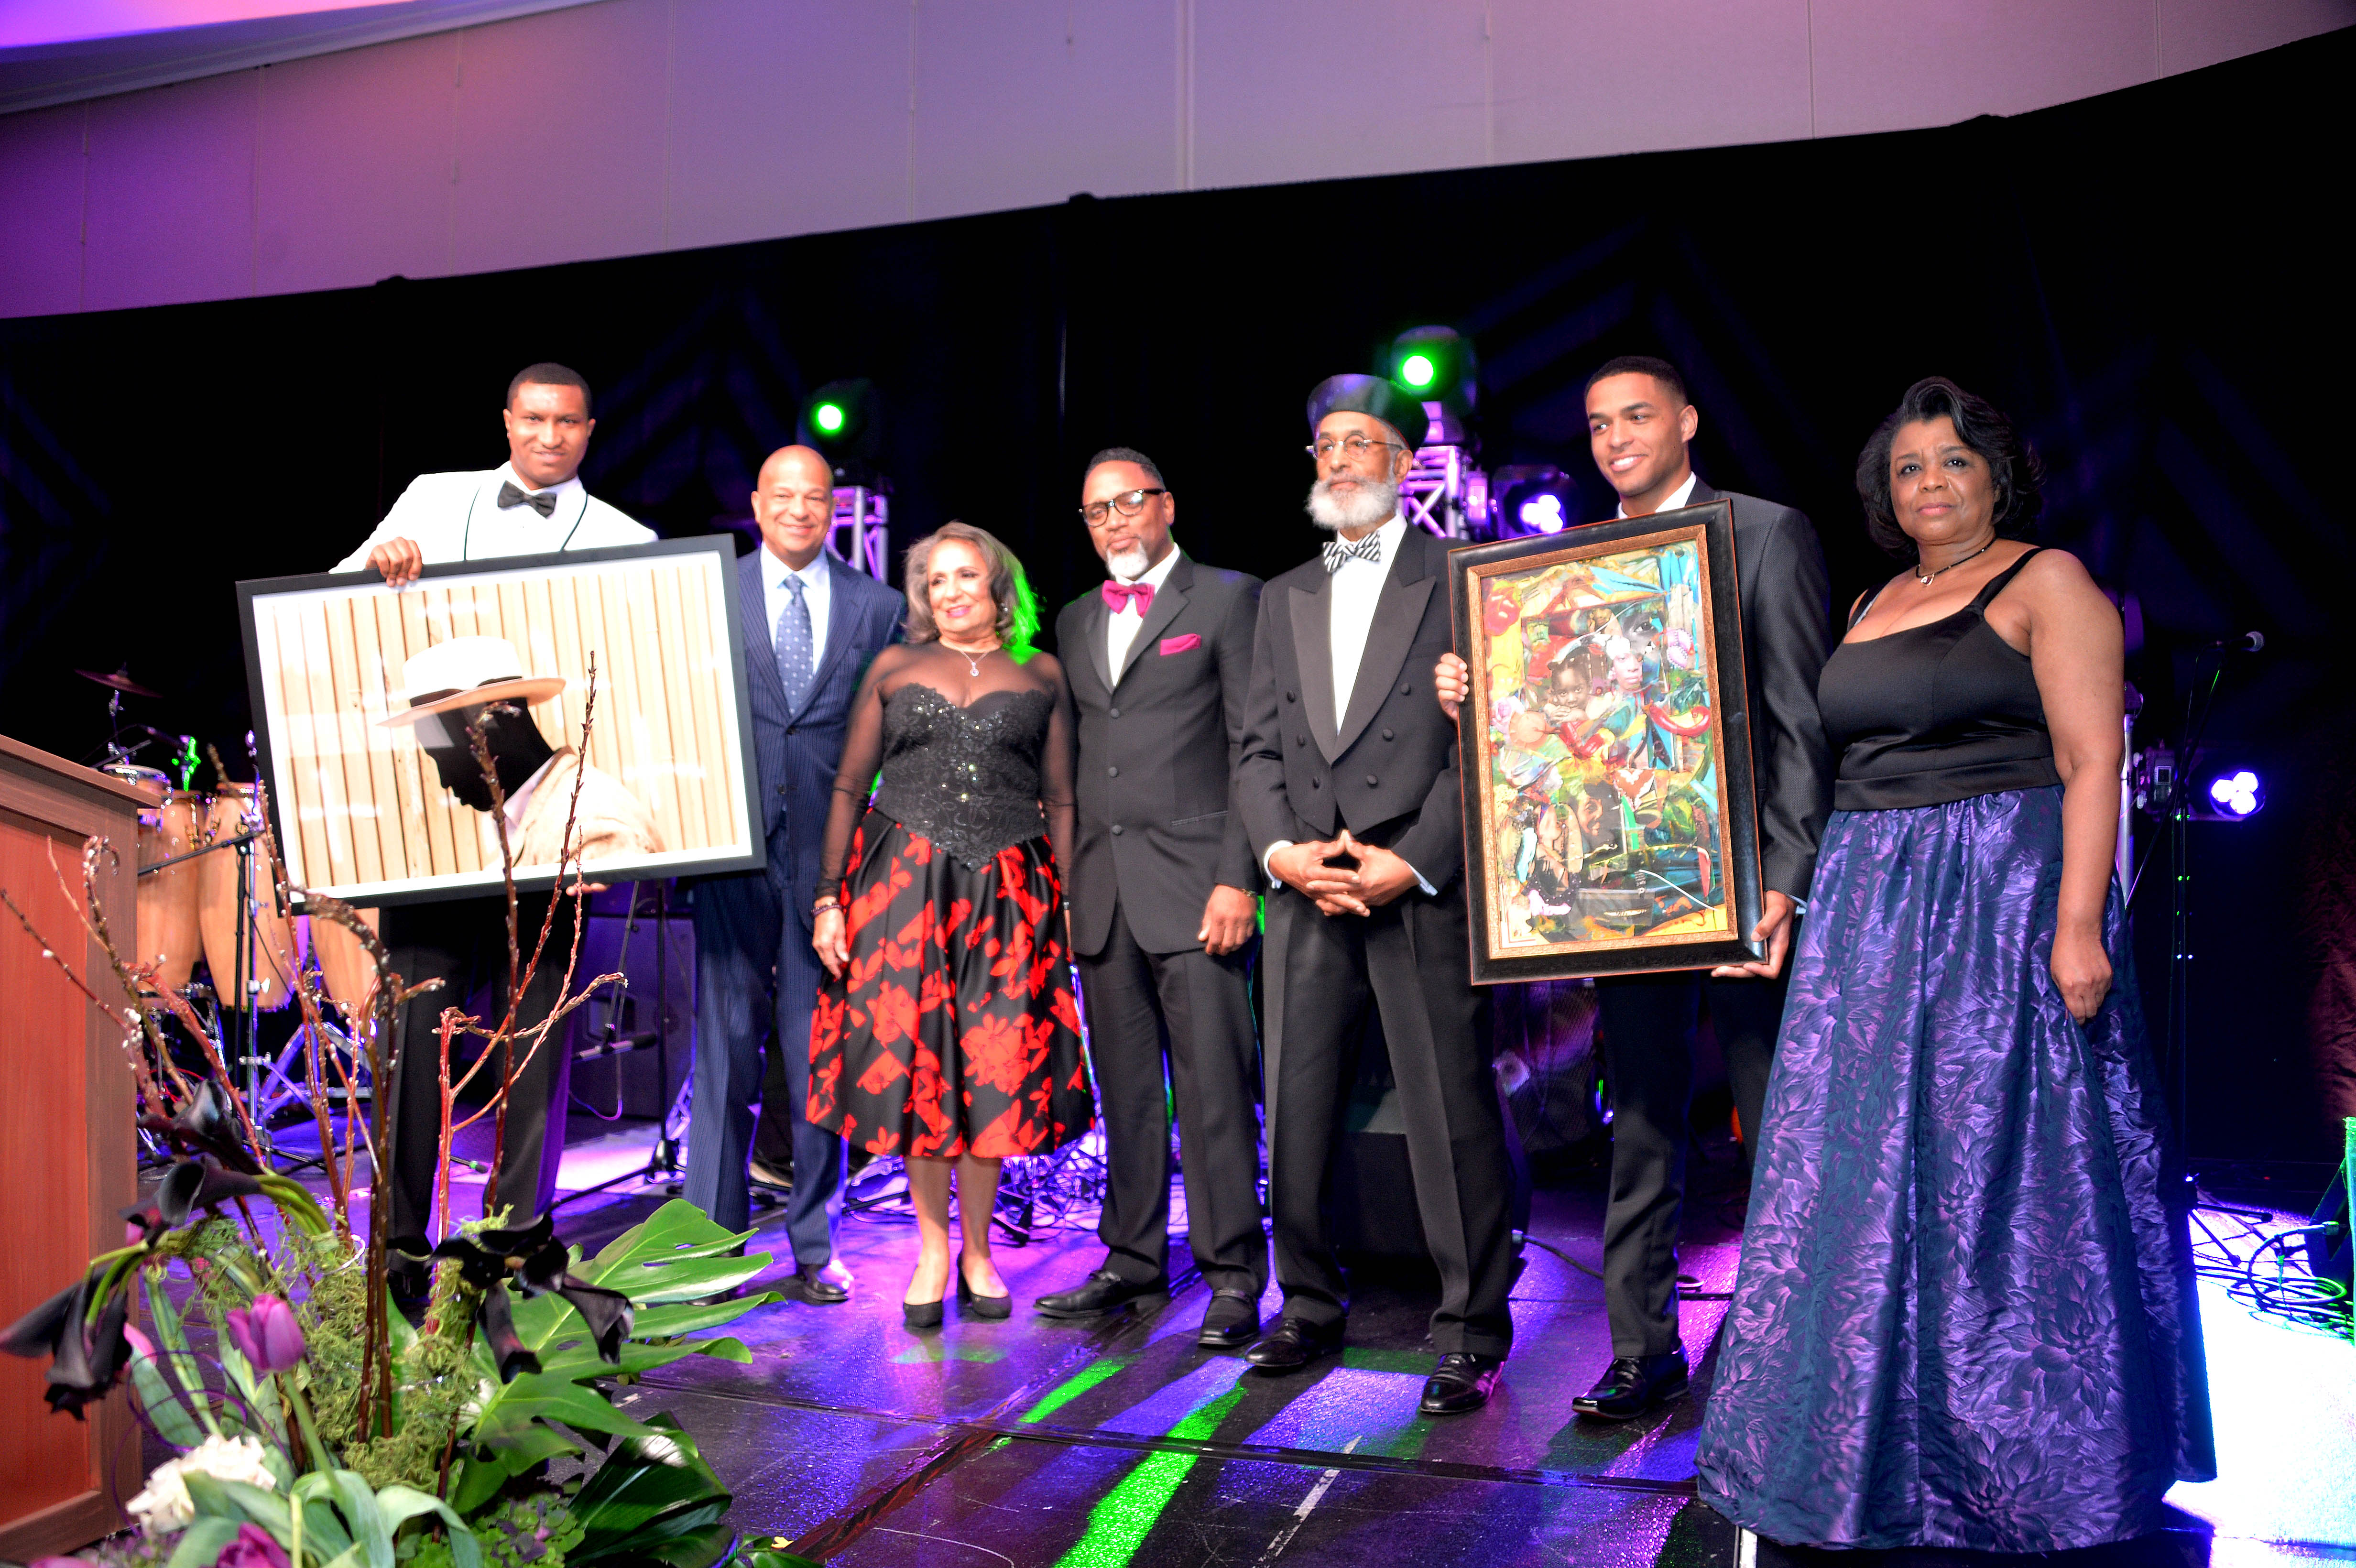 Cathy Hughes and Alfred C. Liggins III of Radio One were honored for their vision and service to the community during the 40th Anniversary of the African American Museum of Philadelphia. Photo: Peter Fitzpatrick/AL DIA News